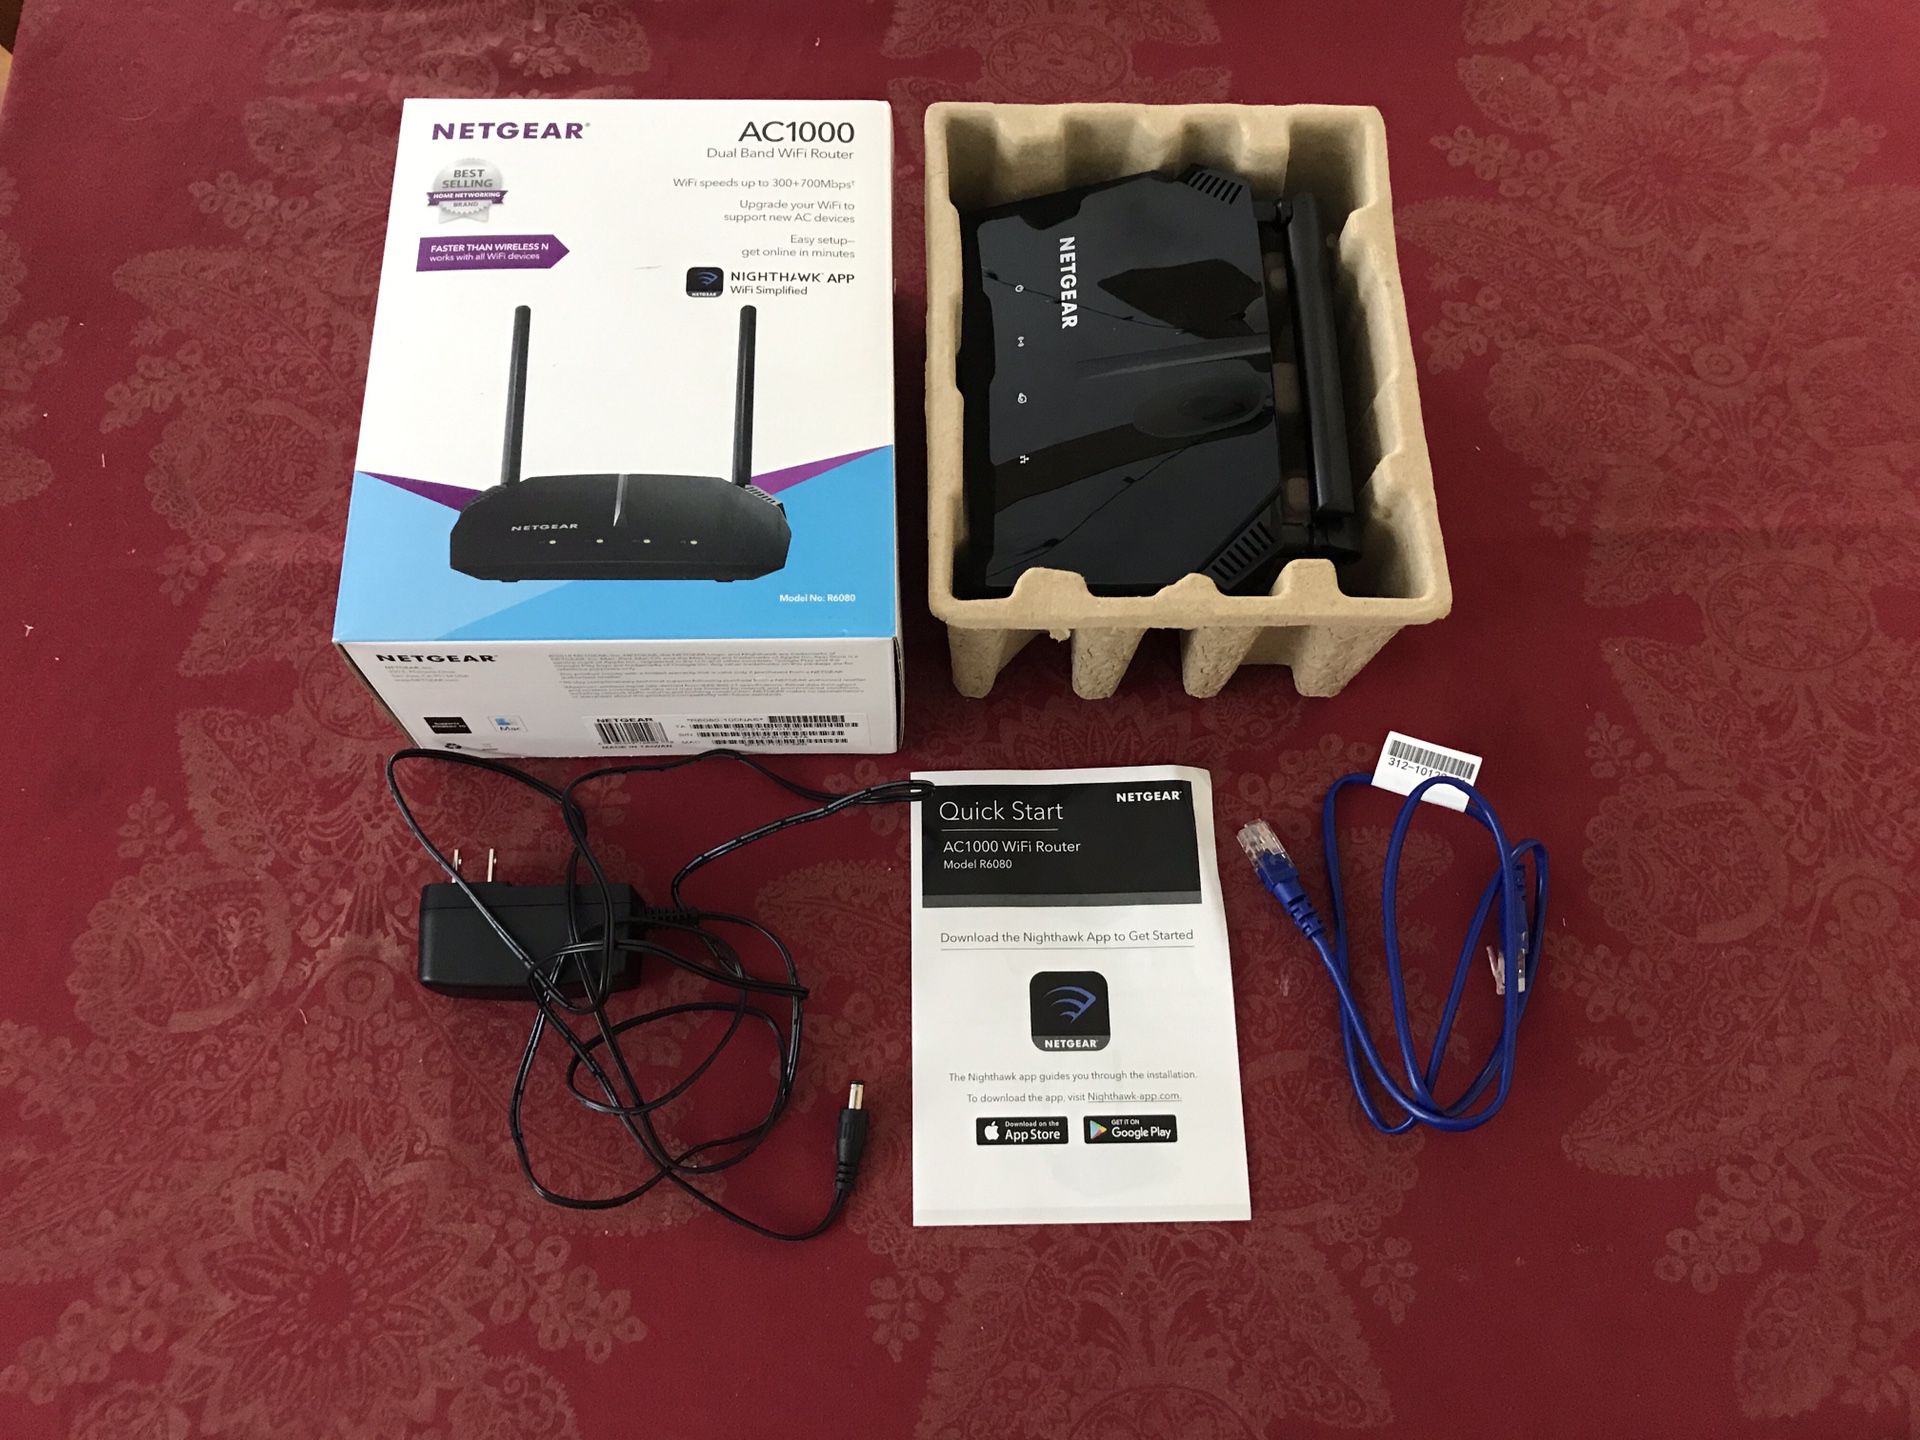 NETGEAR WiFi Router (R6080) AC1000 dual band - new in opened box